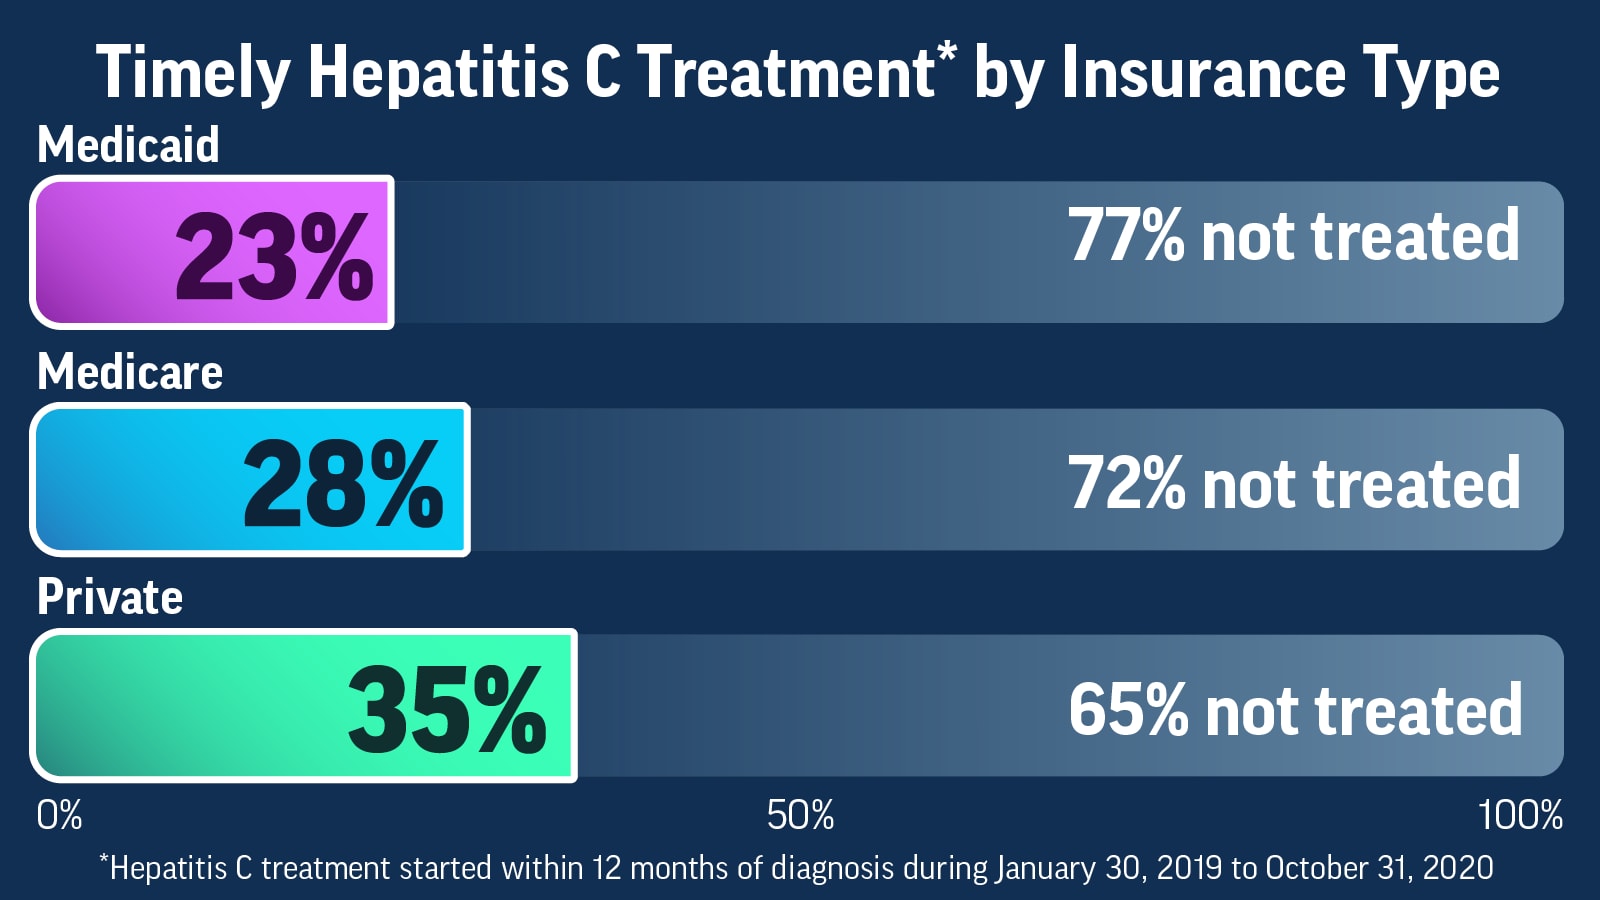 Infographic showing that very few people with Hepatitis C and insurance receive treatment